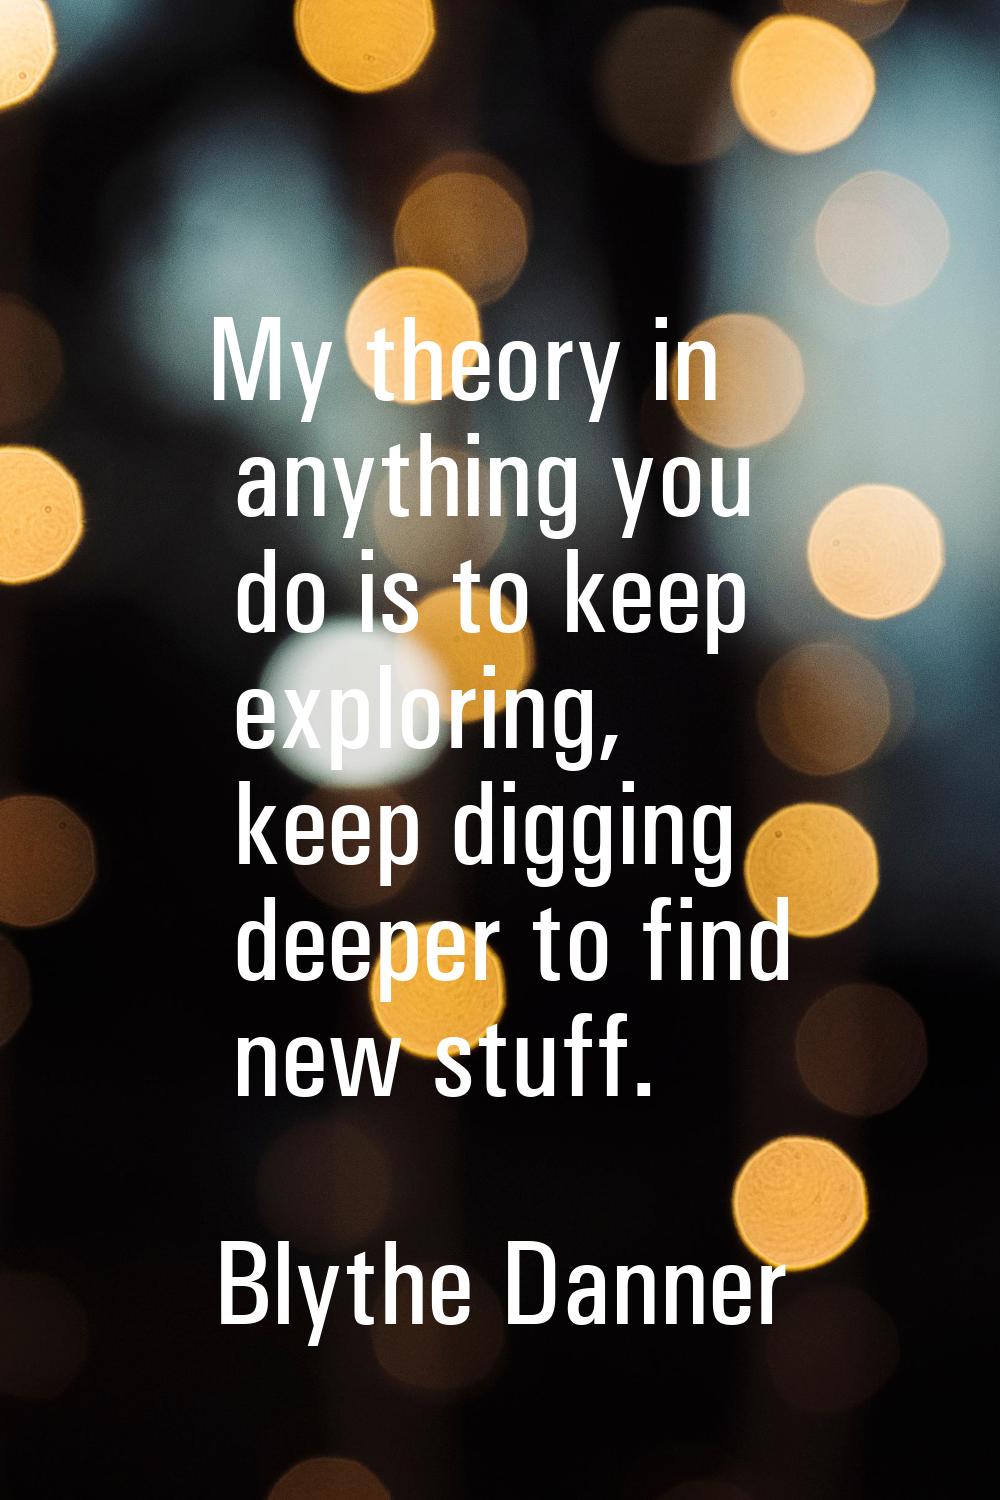 My theory in anything you do is to keep exploring, keep digging deeper to find new stuff.